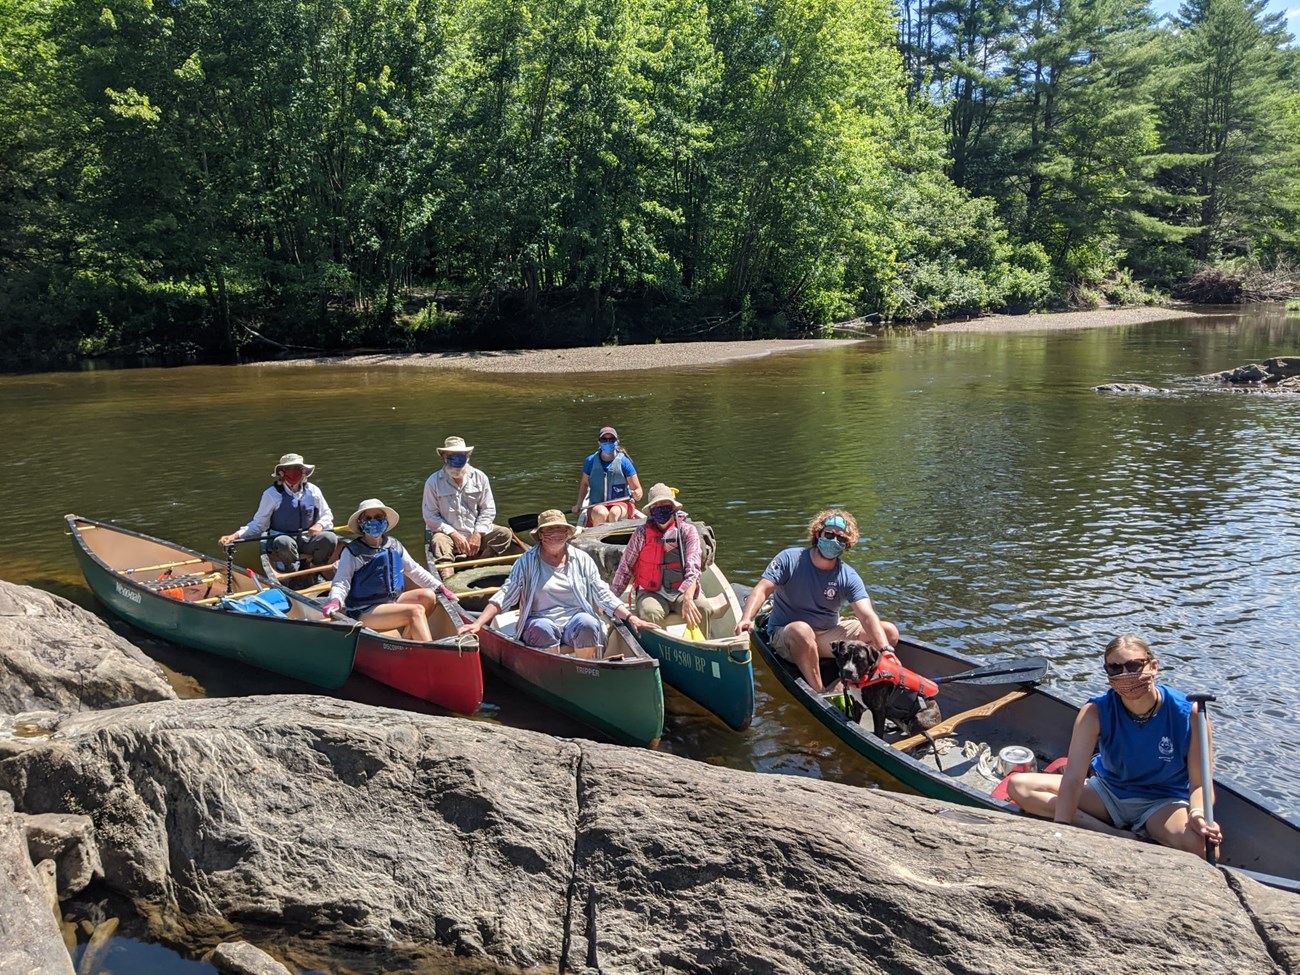 2020 River Cleanup on the Missisquoi River, VT - photo courtesy of UMATR.